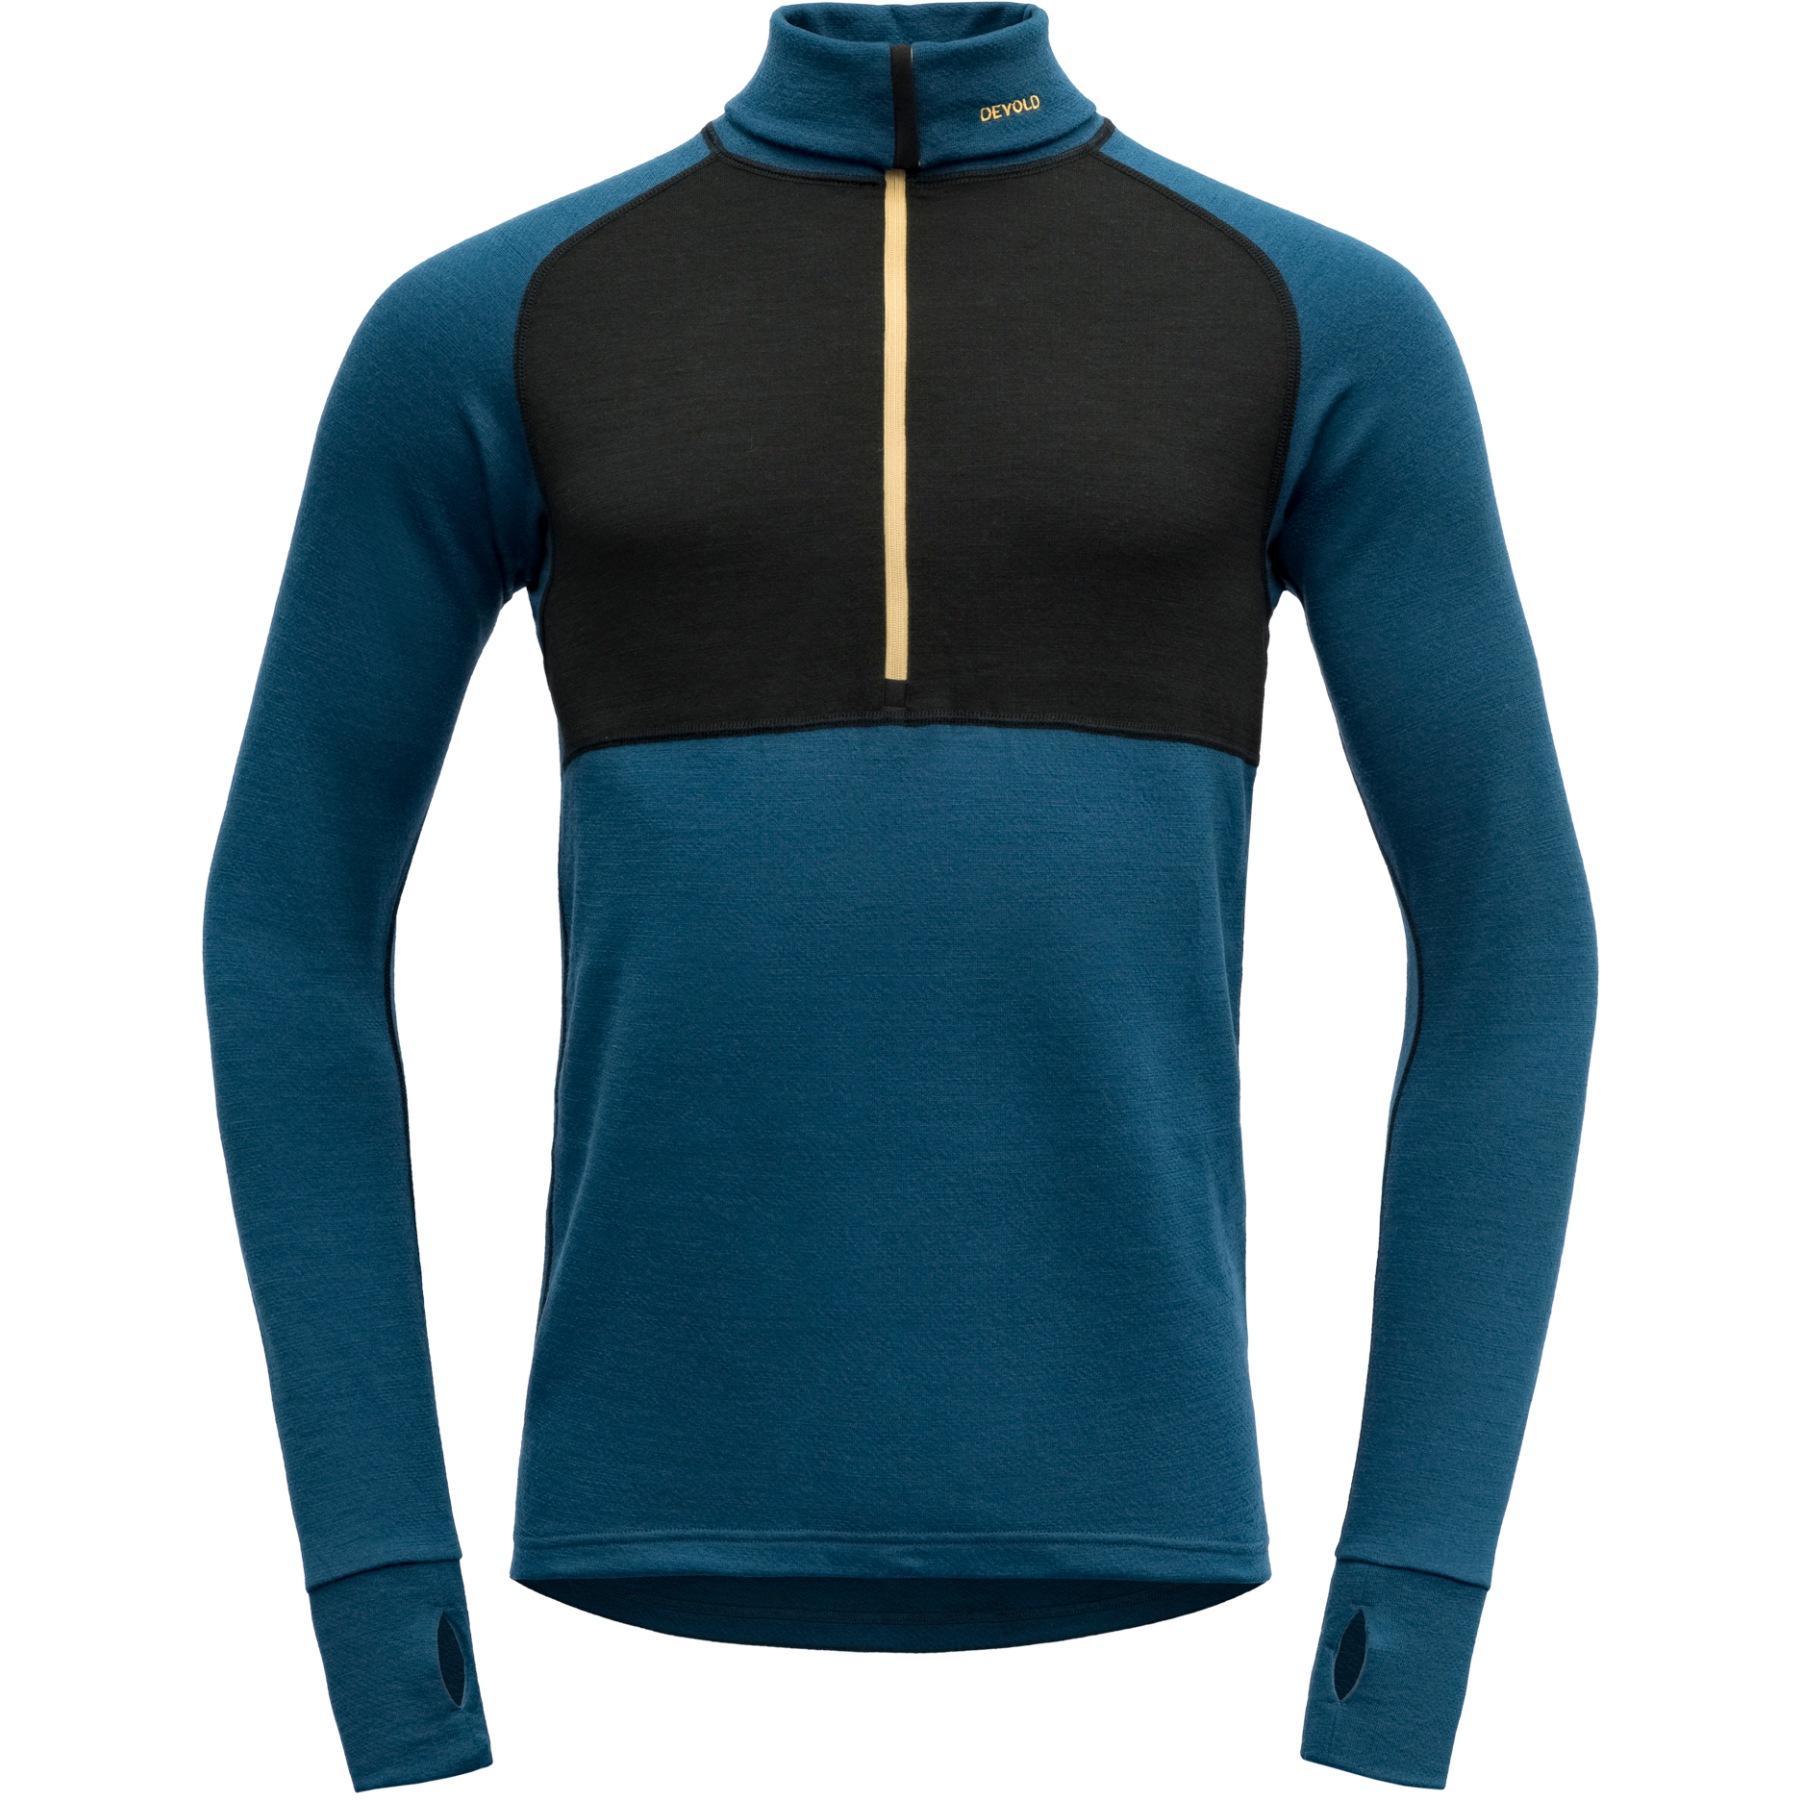 Picture of Devold Expedition Merino 235 Zip Neck Long Sleeve Baselayer - 422 Flood/Black